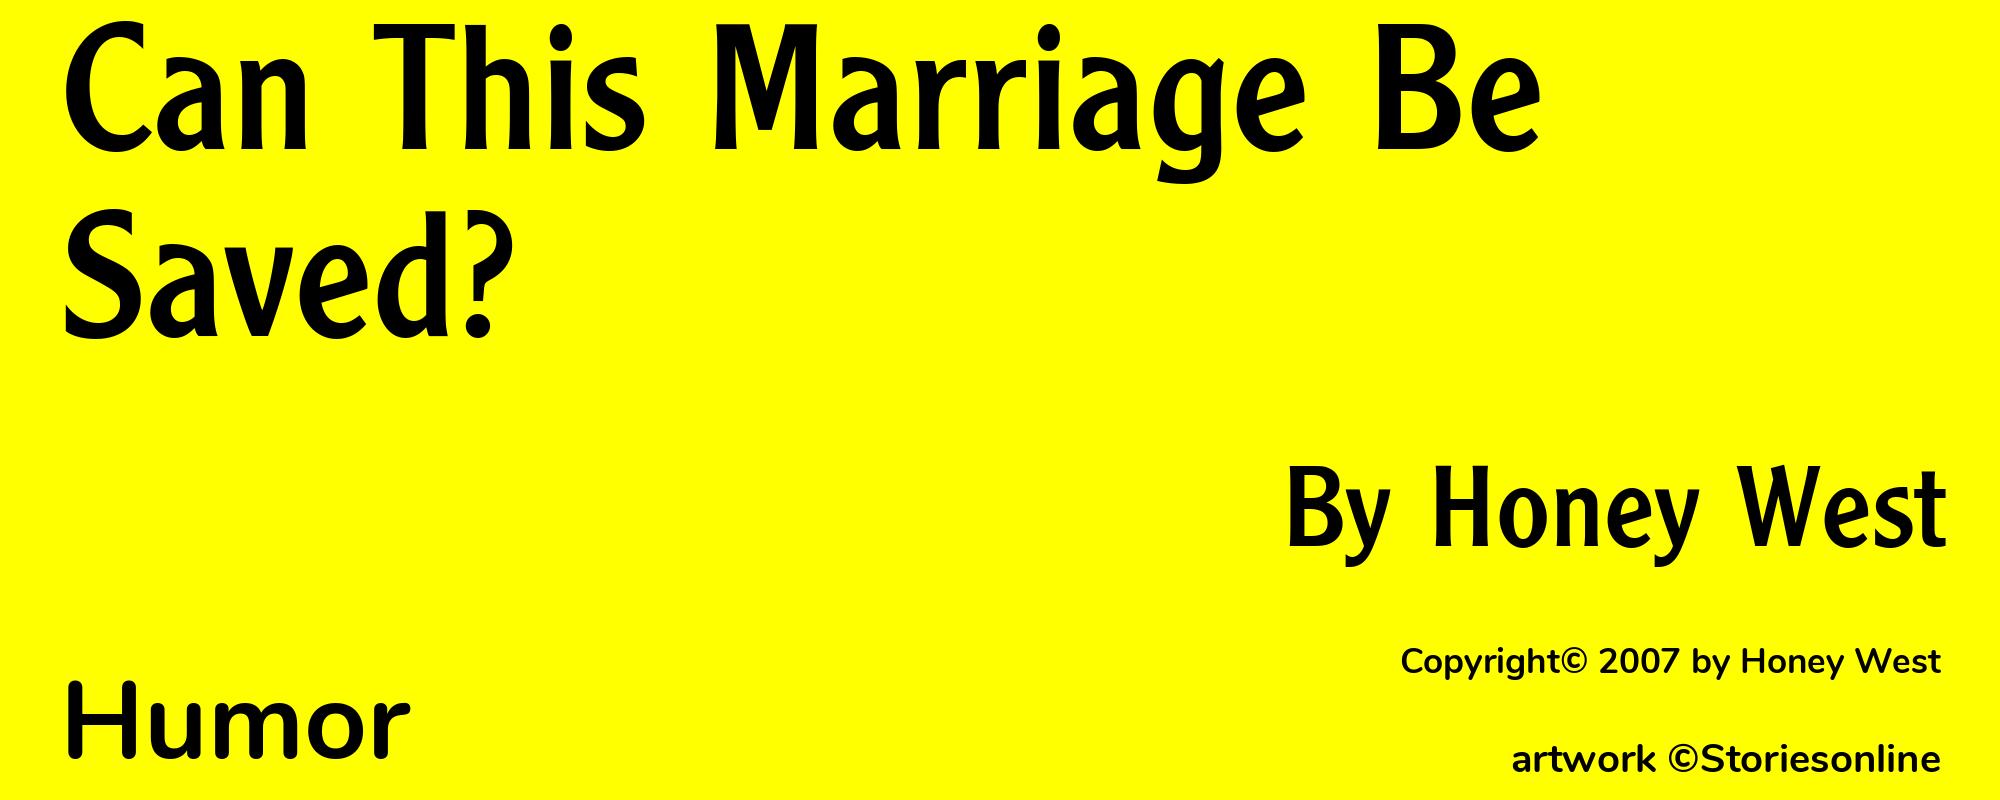 Can This Marriage Be Saved? - Cover